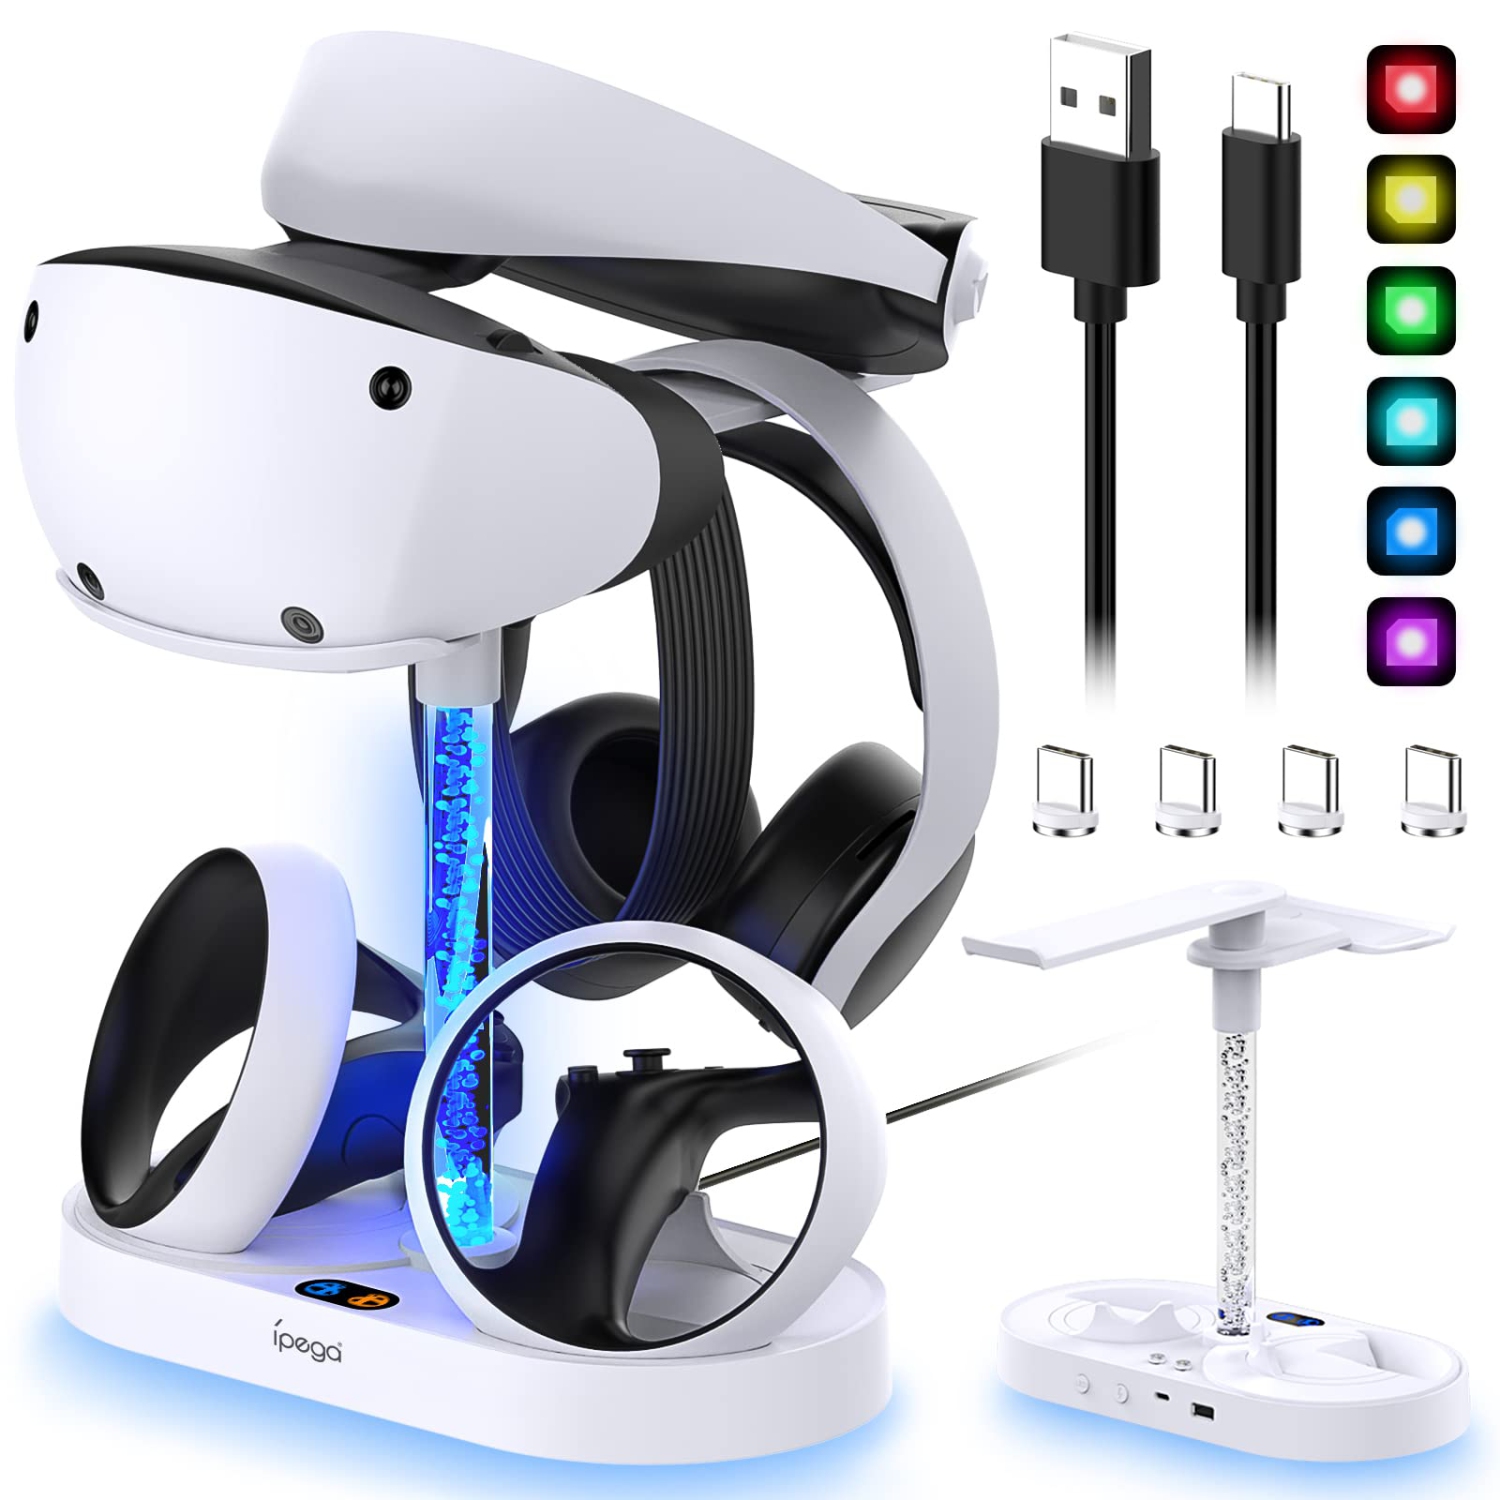 Charging Dock Stand for PSVR2 with 9 RGB Lights, MENEEA Charger Station for Playstation VR2 Controller, PS VR2 Headset Holder& 4xType-C Magnetic Charger Port